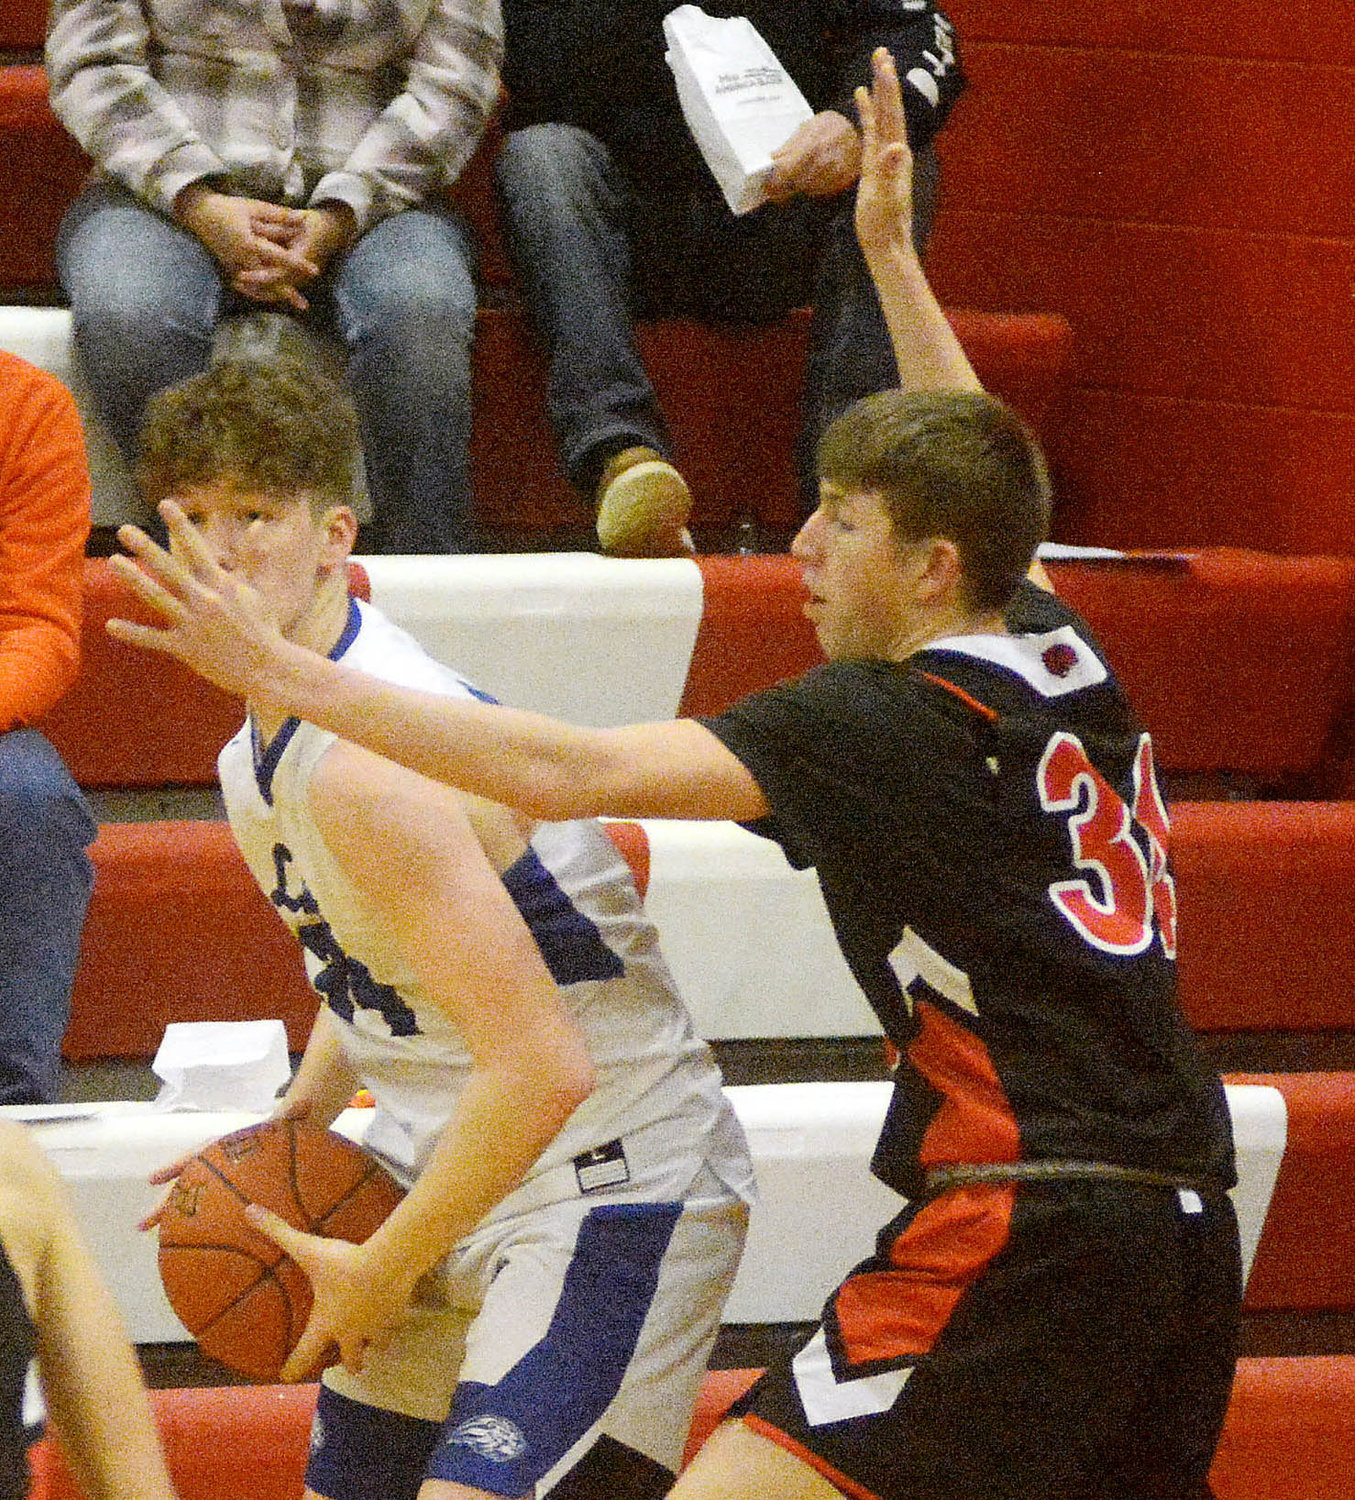 Baylar Smith (far right) plays defense during the Belle Tournament against Crocker.